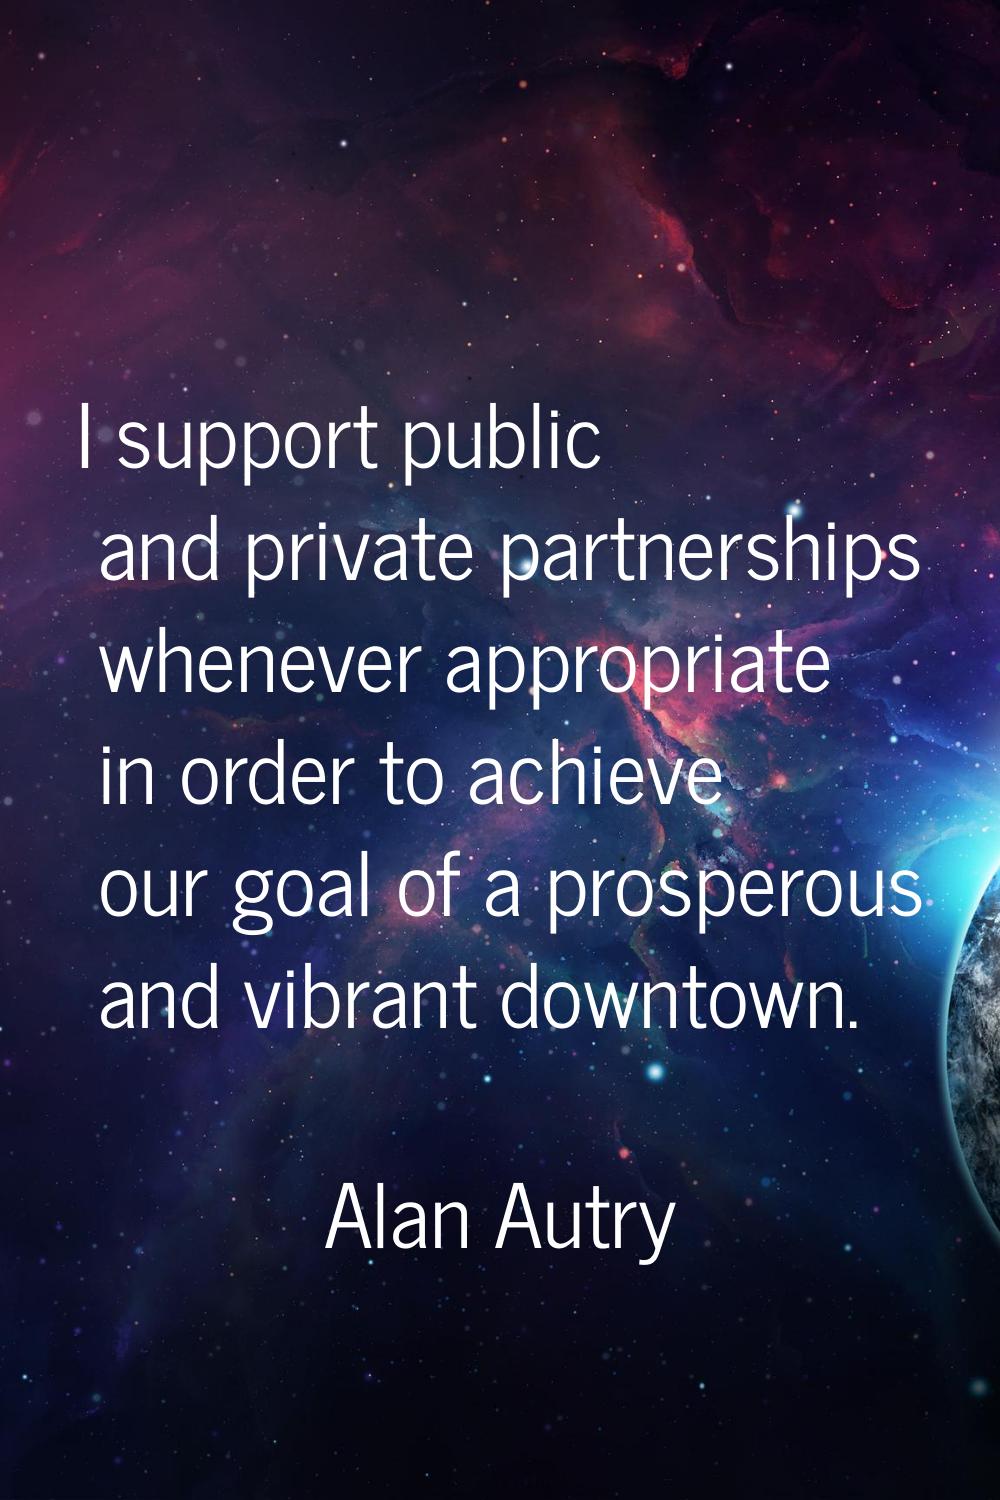 I support public and private partnerships whenever appropriate in order to achieve our goal of a pr